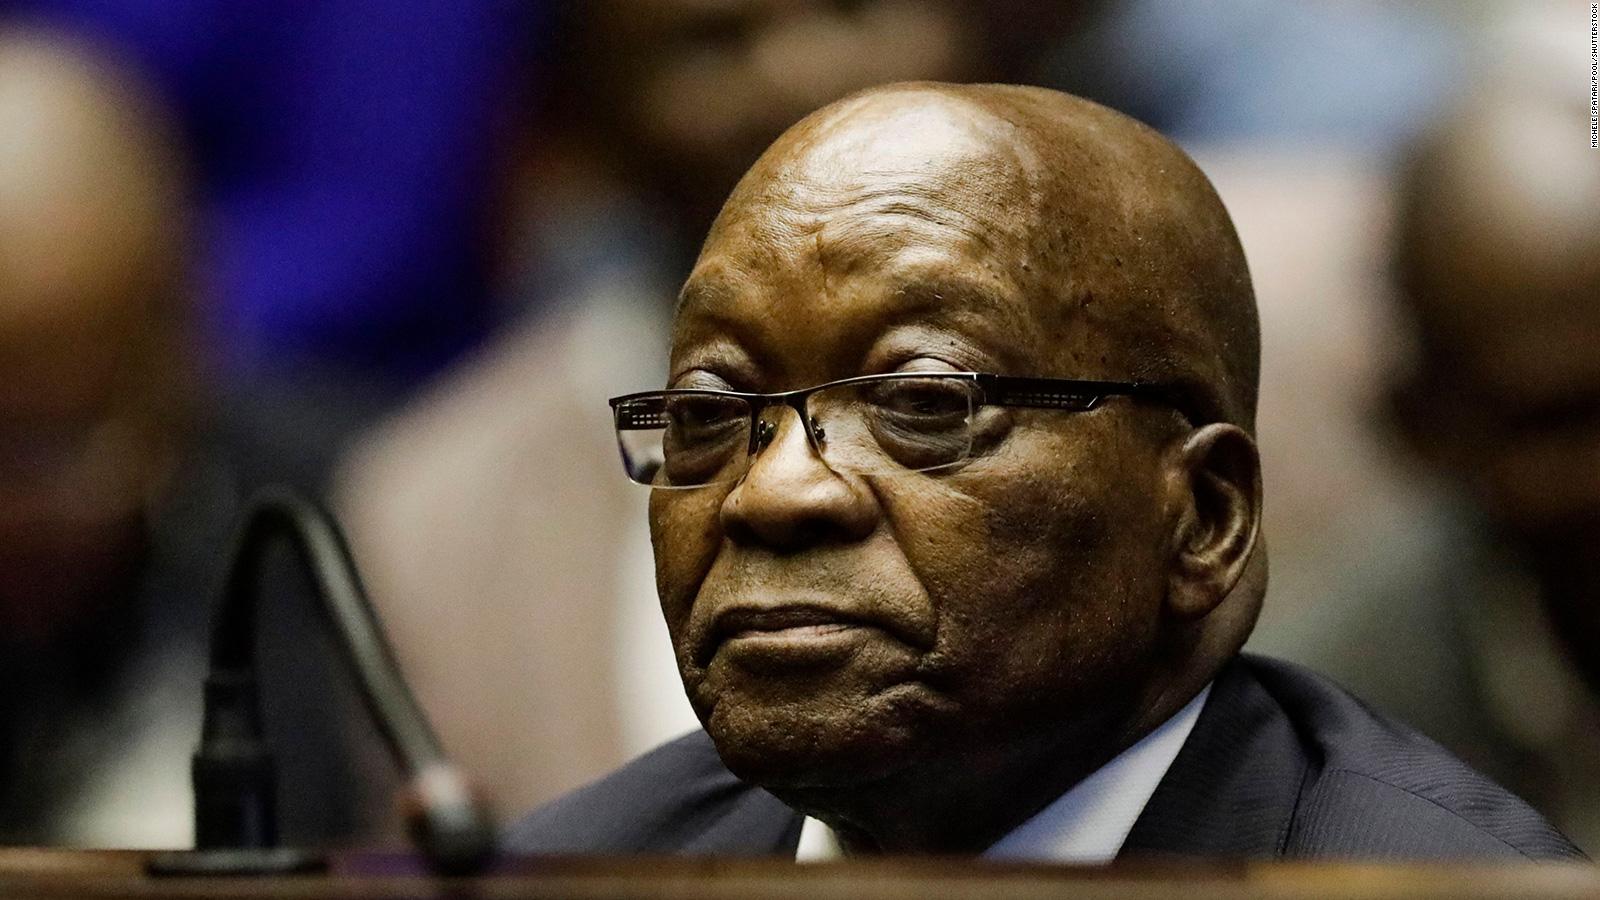 Jacob Zuma, Former South African president, delays prison deadline with ...